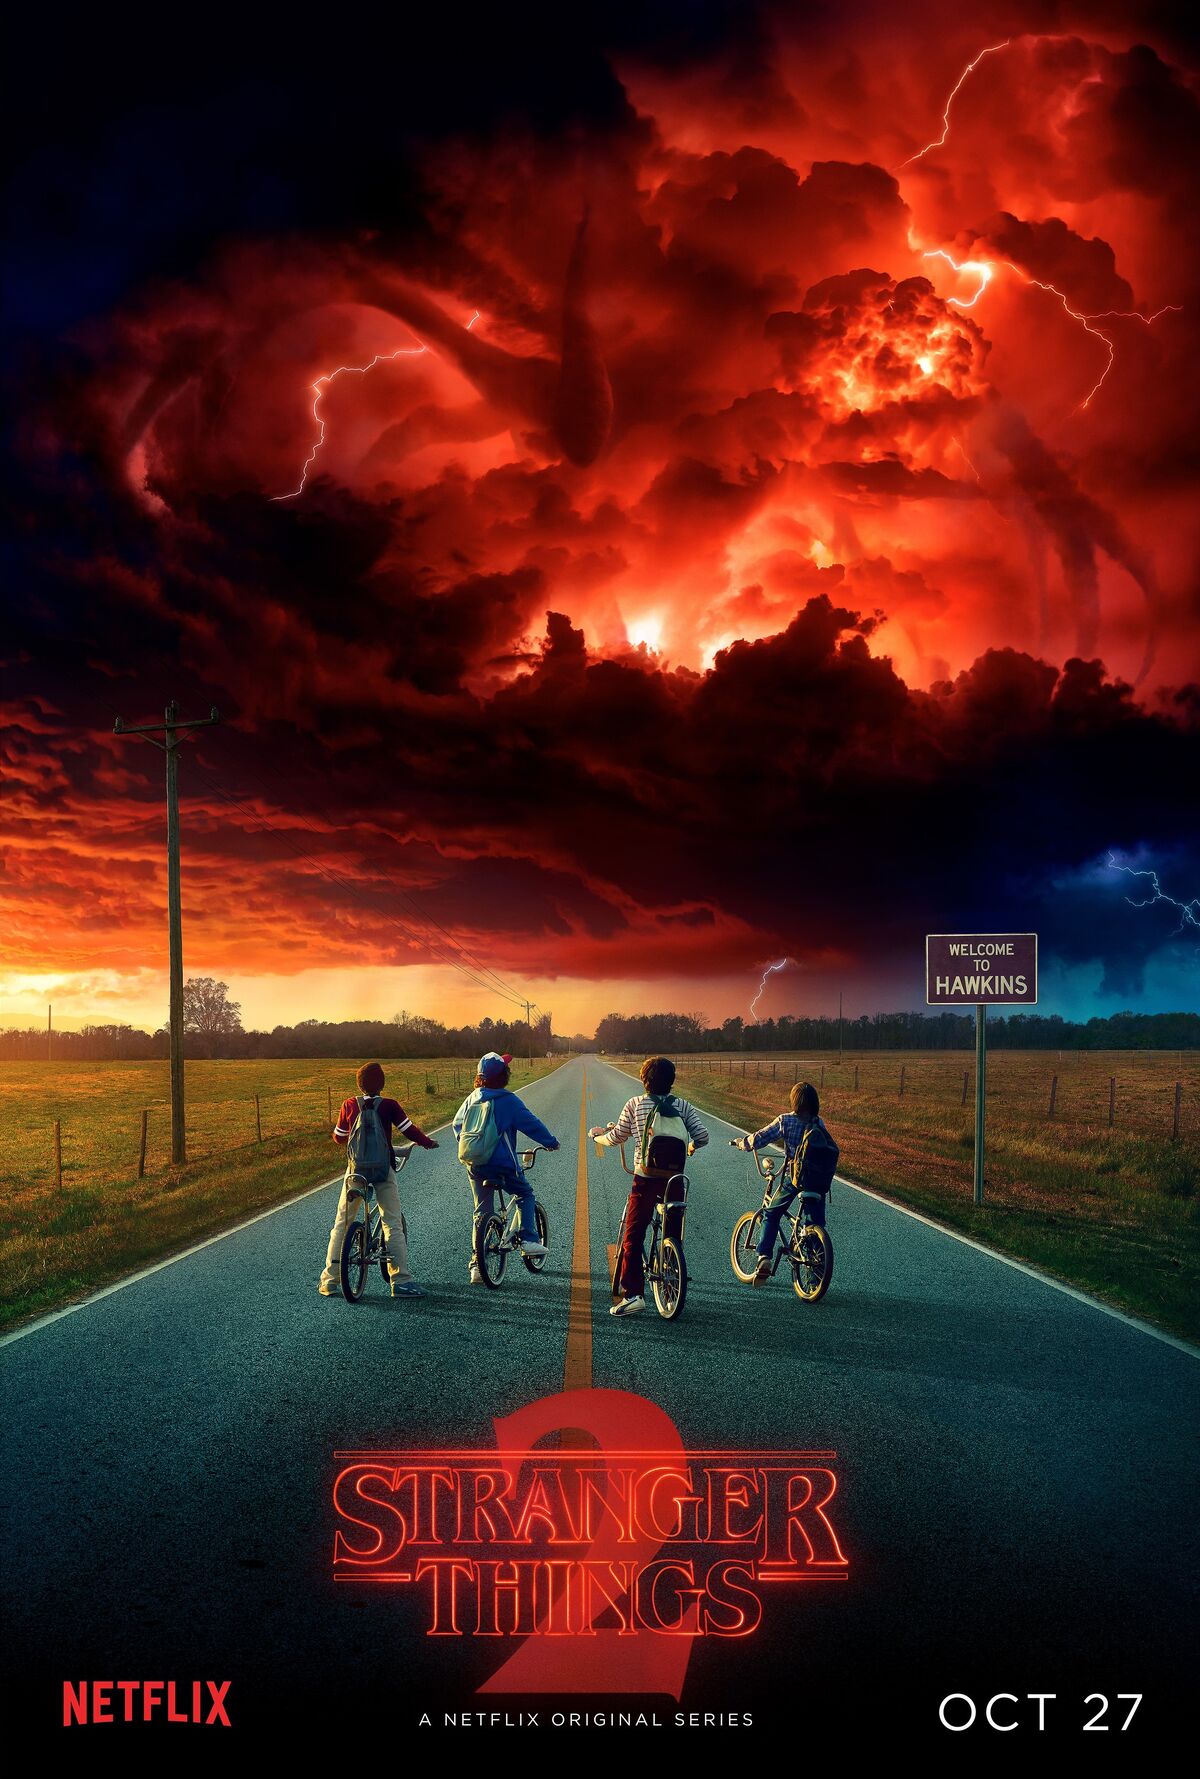 Stranger Things Season 4 Part 2 Release Date, Episodes and More